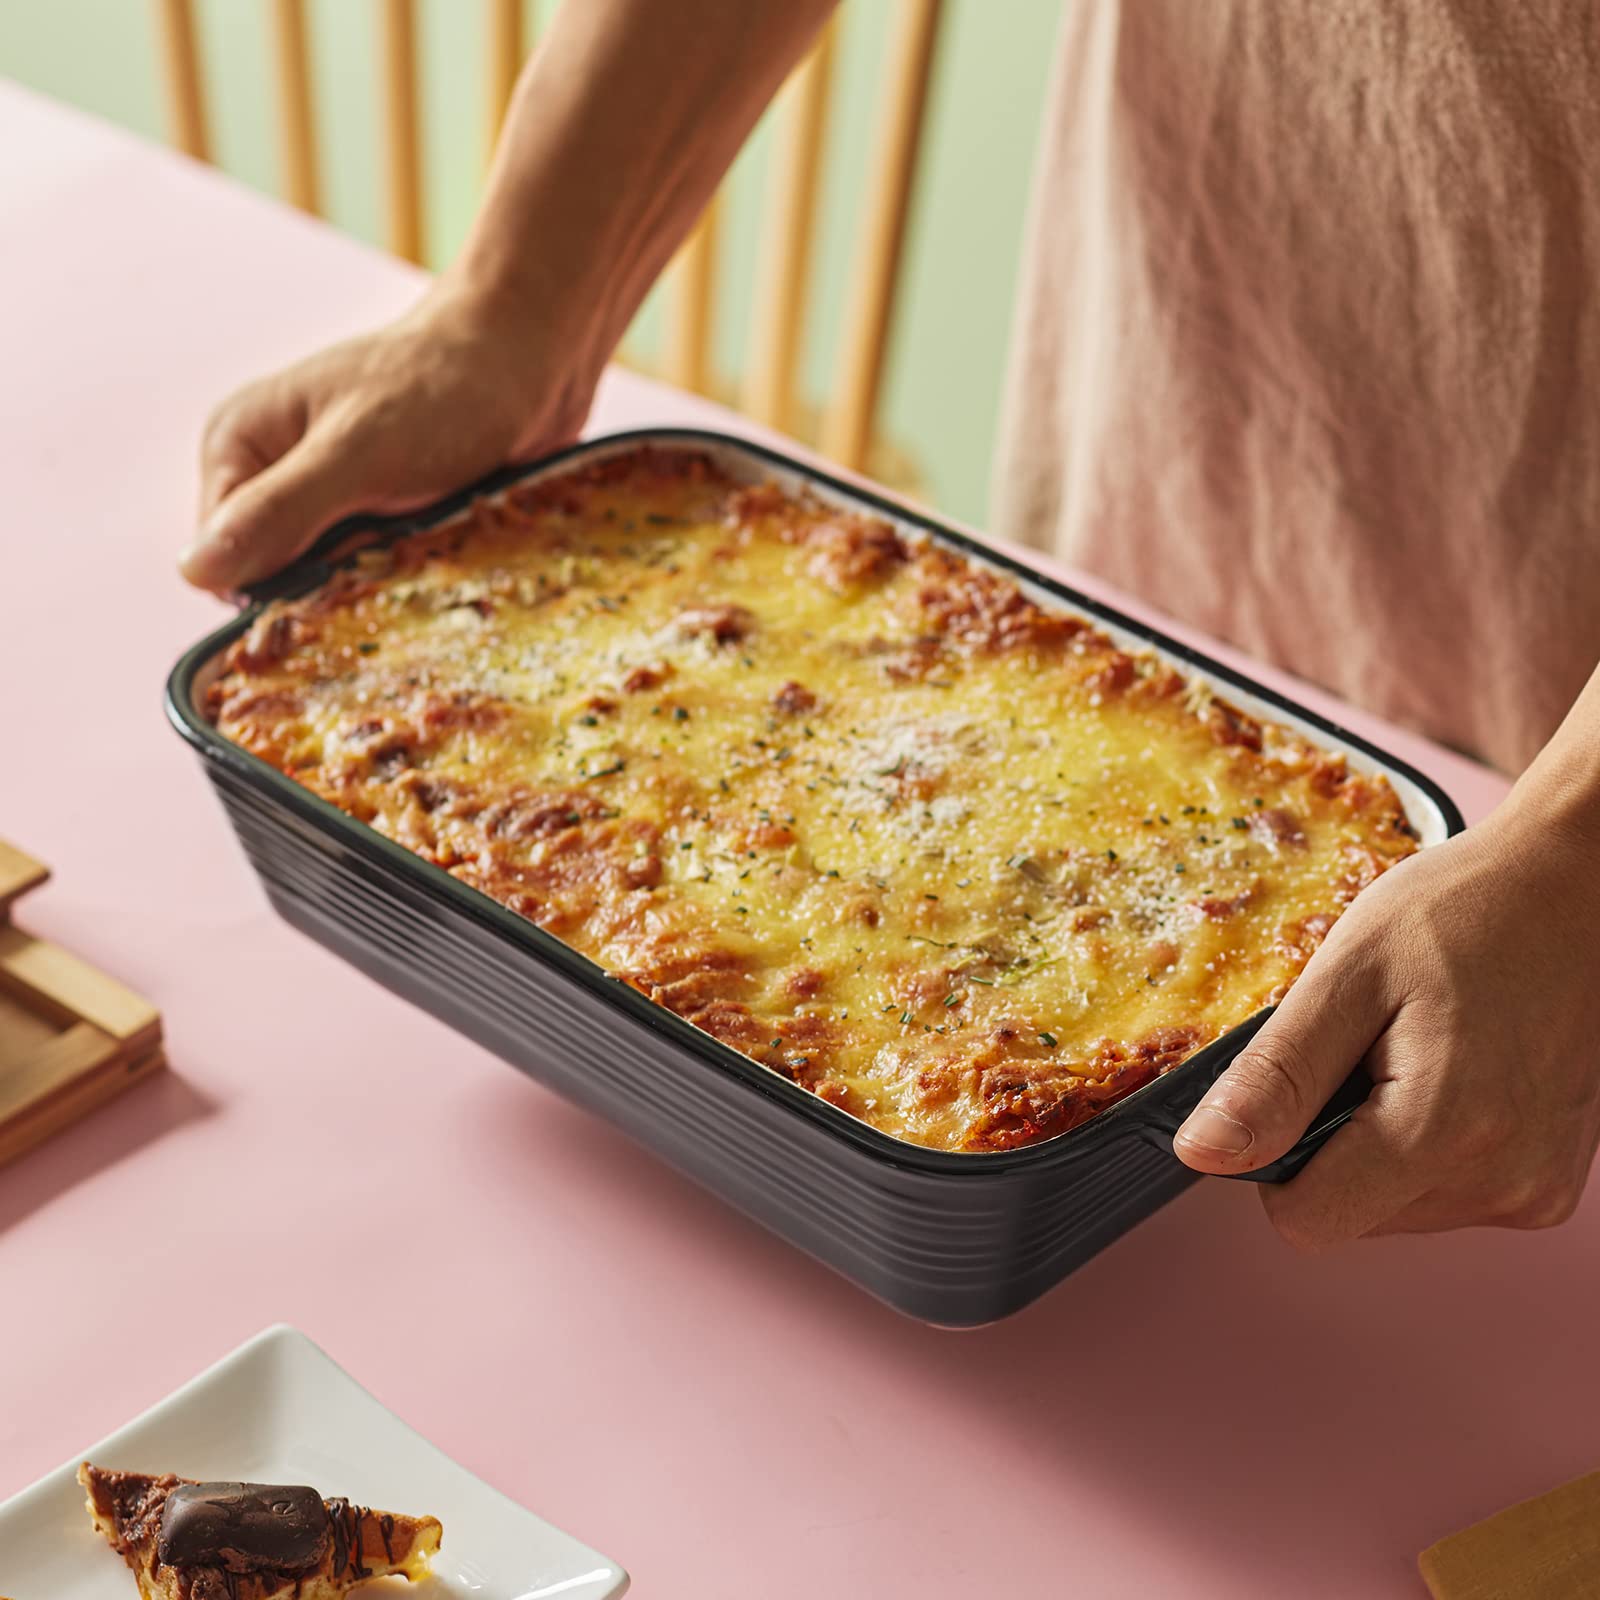 LIFVER 2.45 Quart Baking Dish with Handles, Black Ceramic Lasagna Baking Dishes for Oven, Deep Casserole Dish, Rectangular Baking Pan for Cooking, Cake, Banquet and Dinner, Baking Gifts, 11.2" X 7.2"